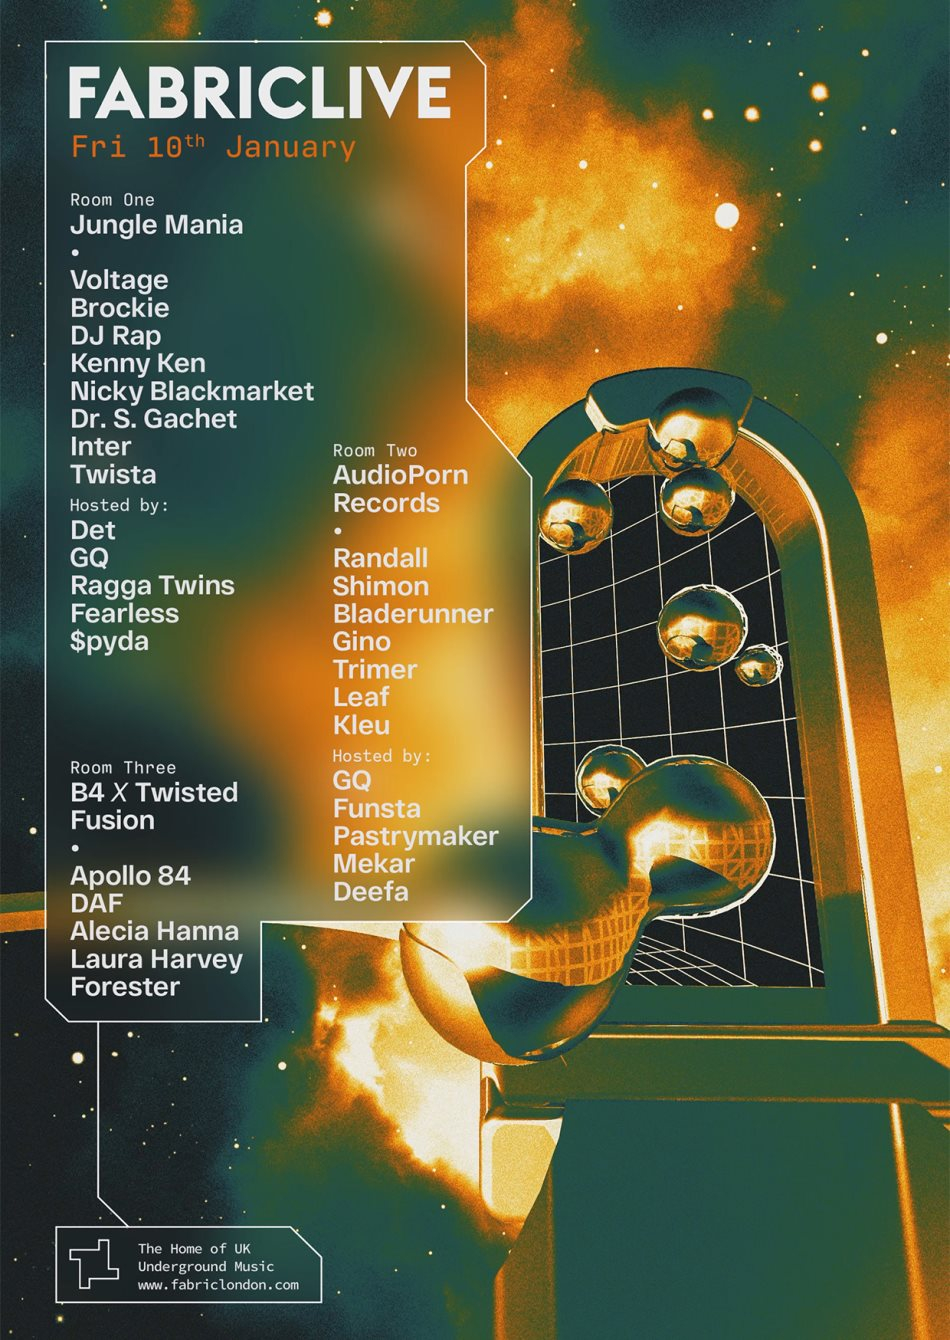 FABRICLIVE: Jungle Mania, Audioporn Records & B4 x Twisted Fusion - Flyer back